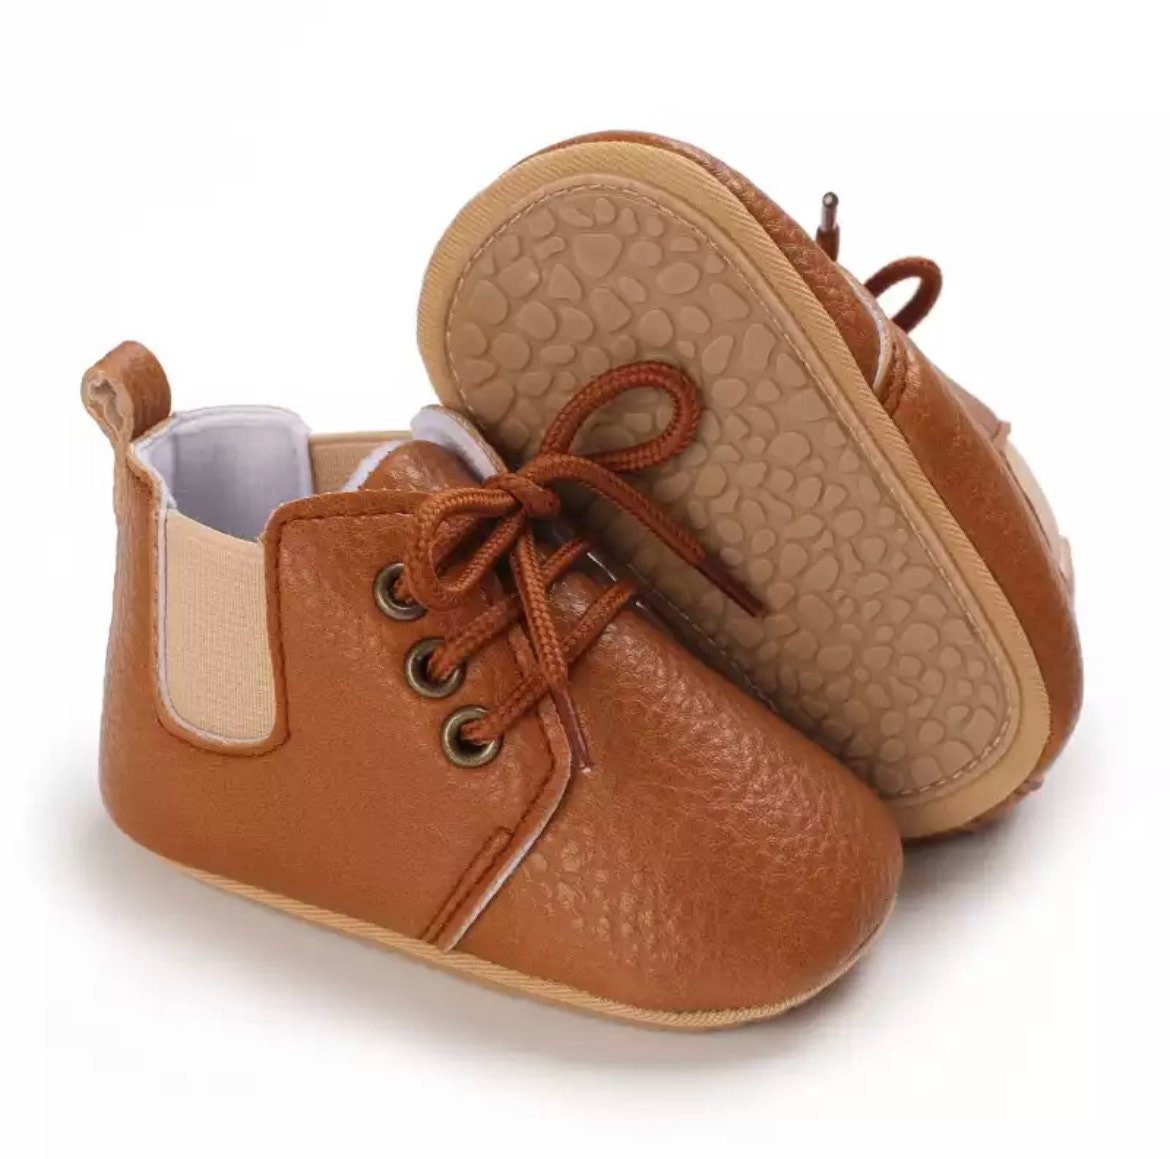 Sparrow Boots - Handmade Baby Boots with Elastic sides and lace ups-Handmade High Quality Leather Baby Shoes, Breathable Upper, First Walker Baby Shoes , Anti-Slip, Baby Shower,  Unisex Baby Shoes.
Welcome! Thanks for looking in our -Bijou Bubs